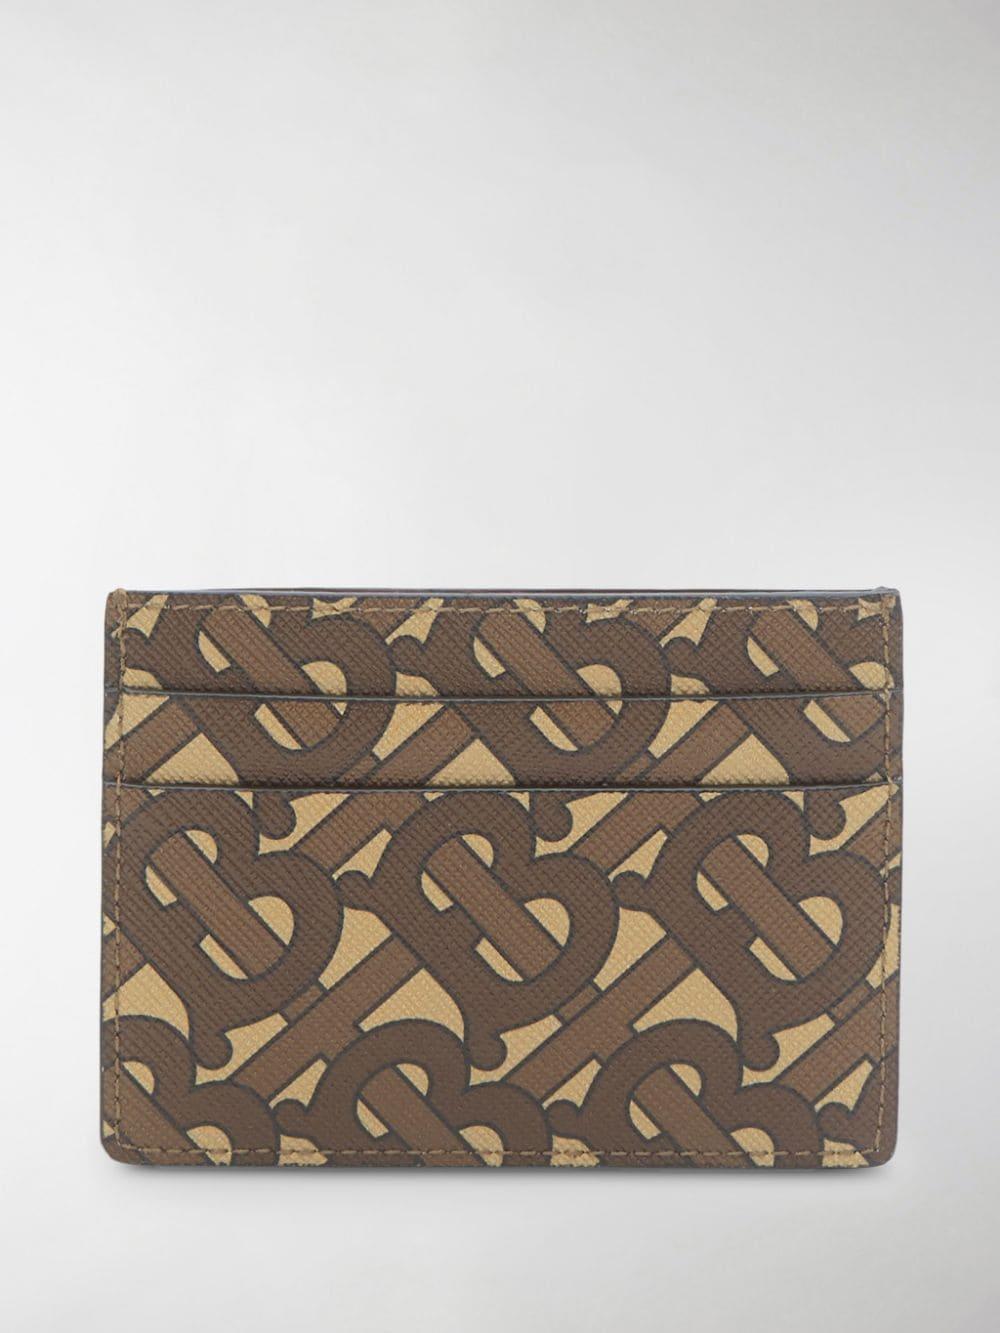 Burberry Leather Sandon Tb Print Card Holder in Bridle Brown (Brown) for  Men - Lyst